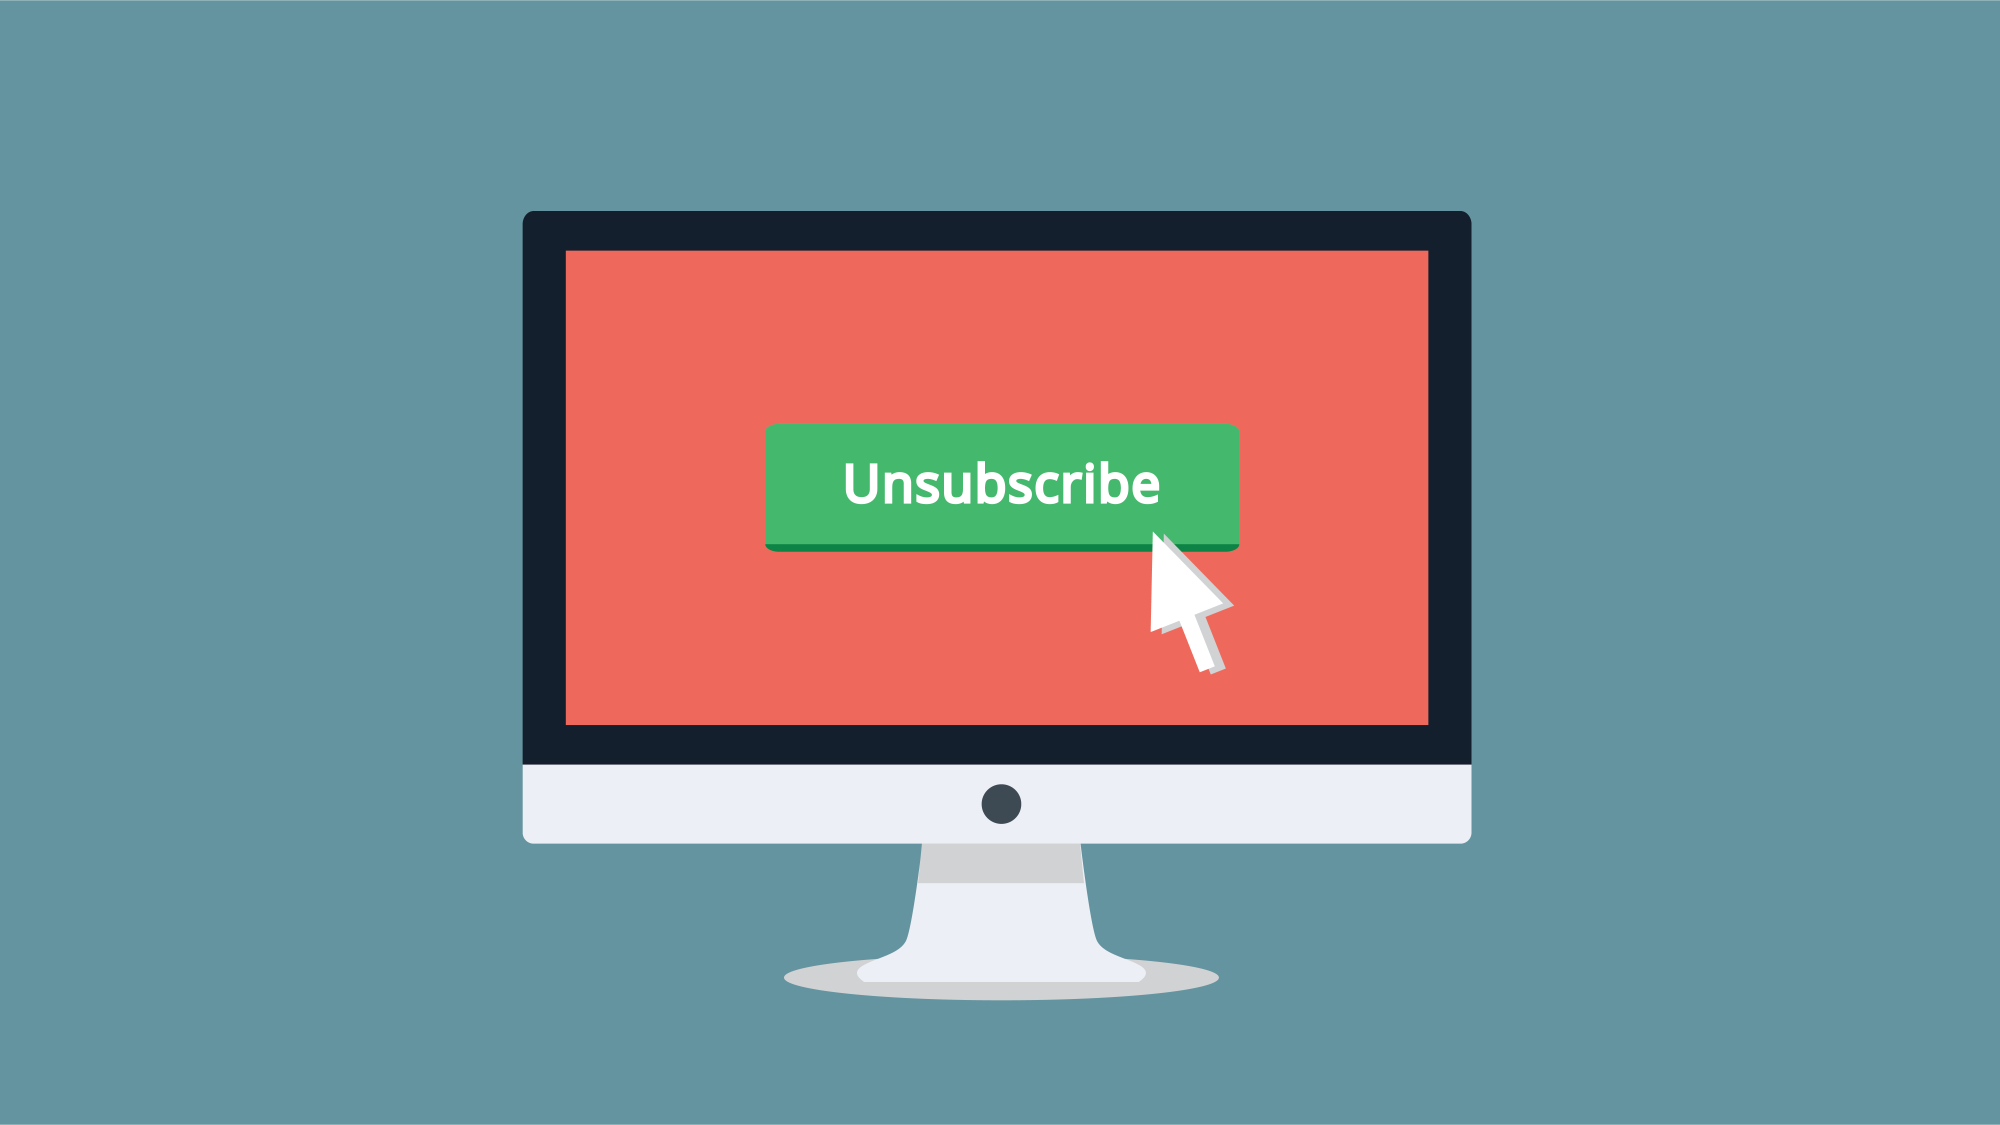 How to Unsubscribe from Spam and Junk Emails